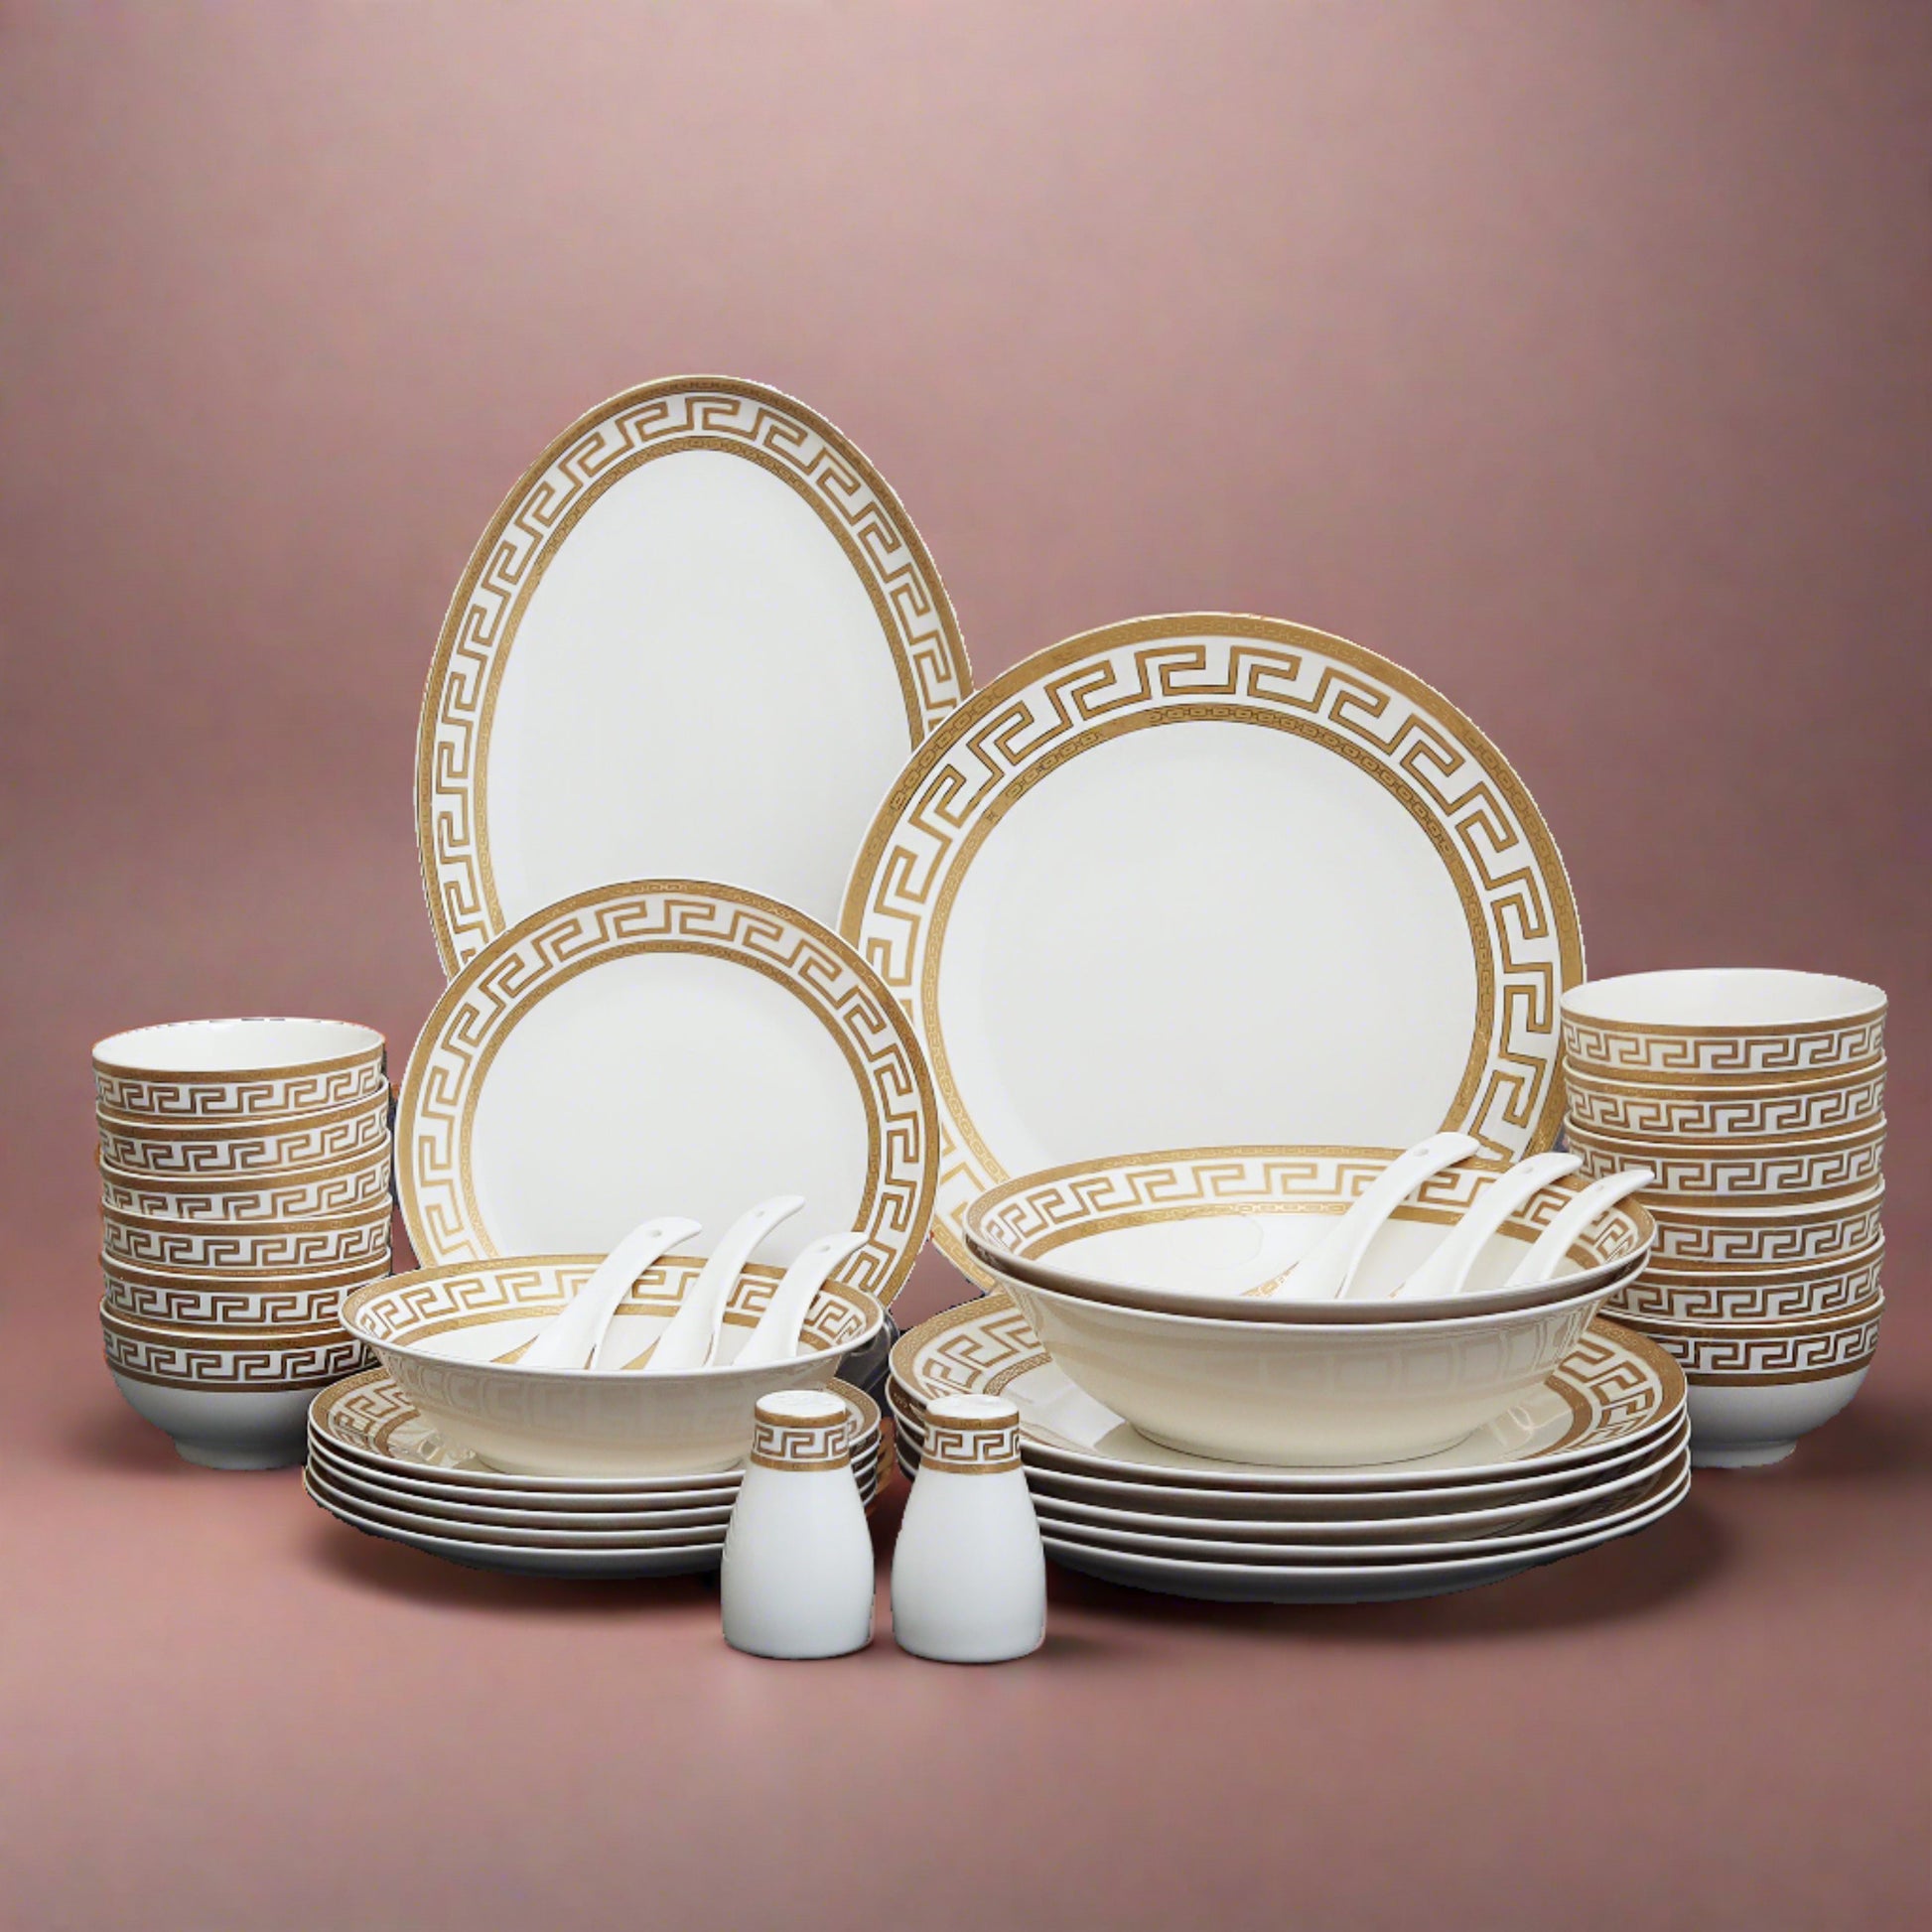 Elegant 36-piece fine bone china dinner set with floral motifs - perfect for luxurious dining experiences.